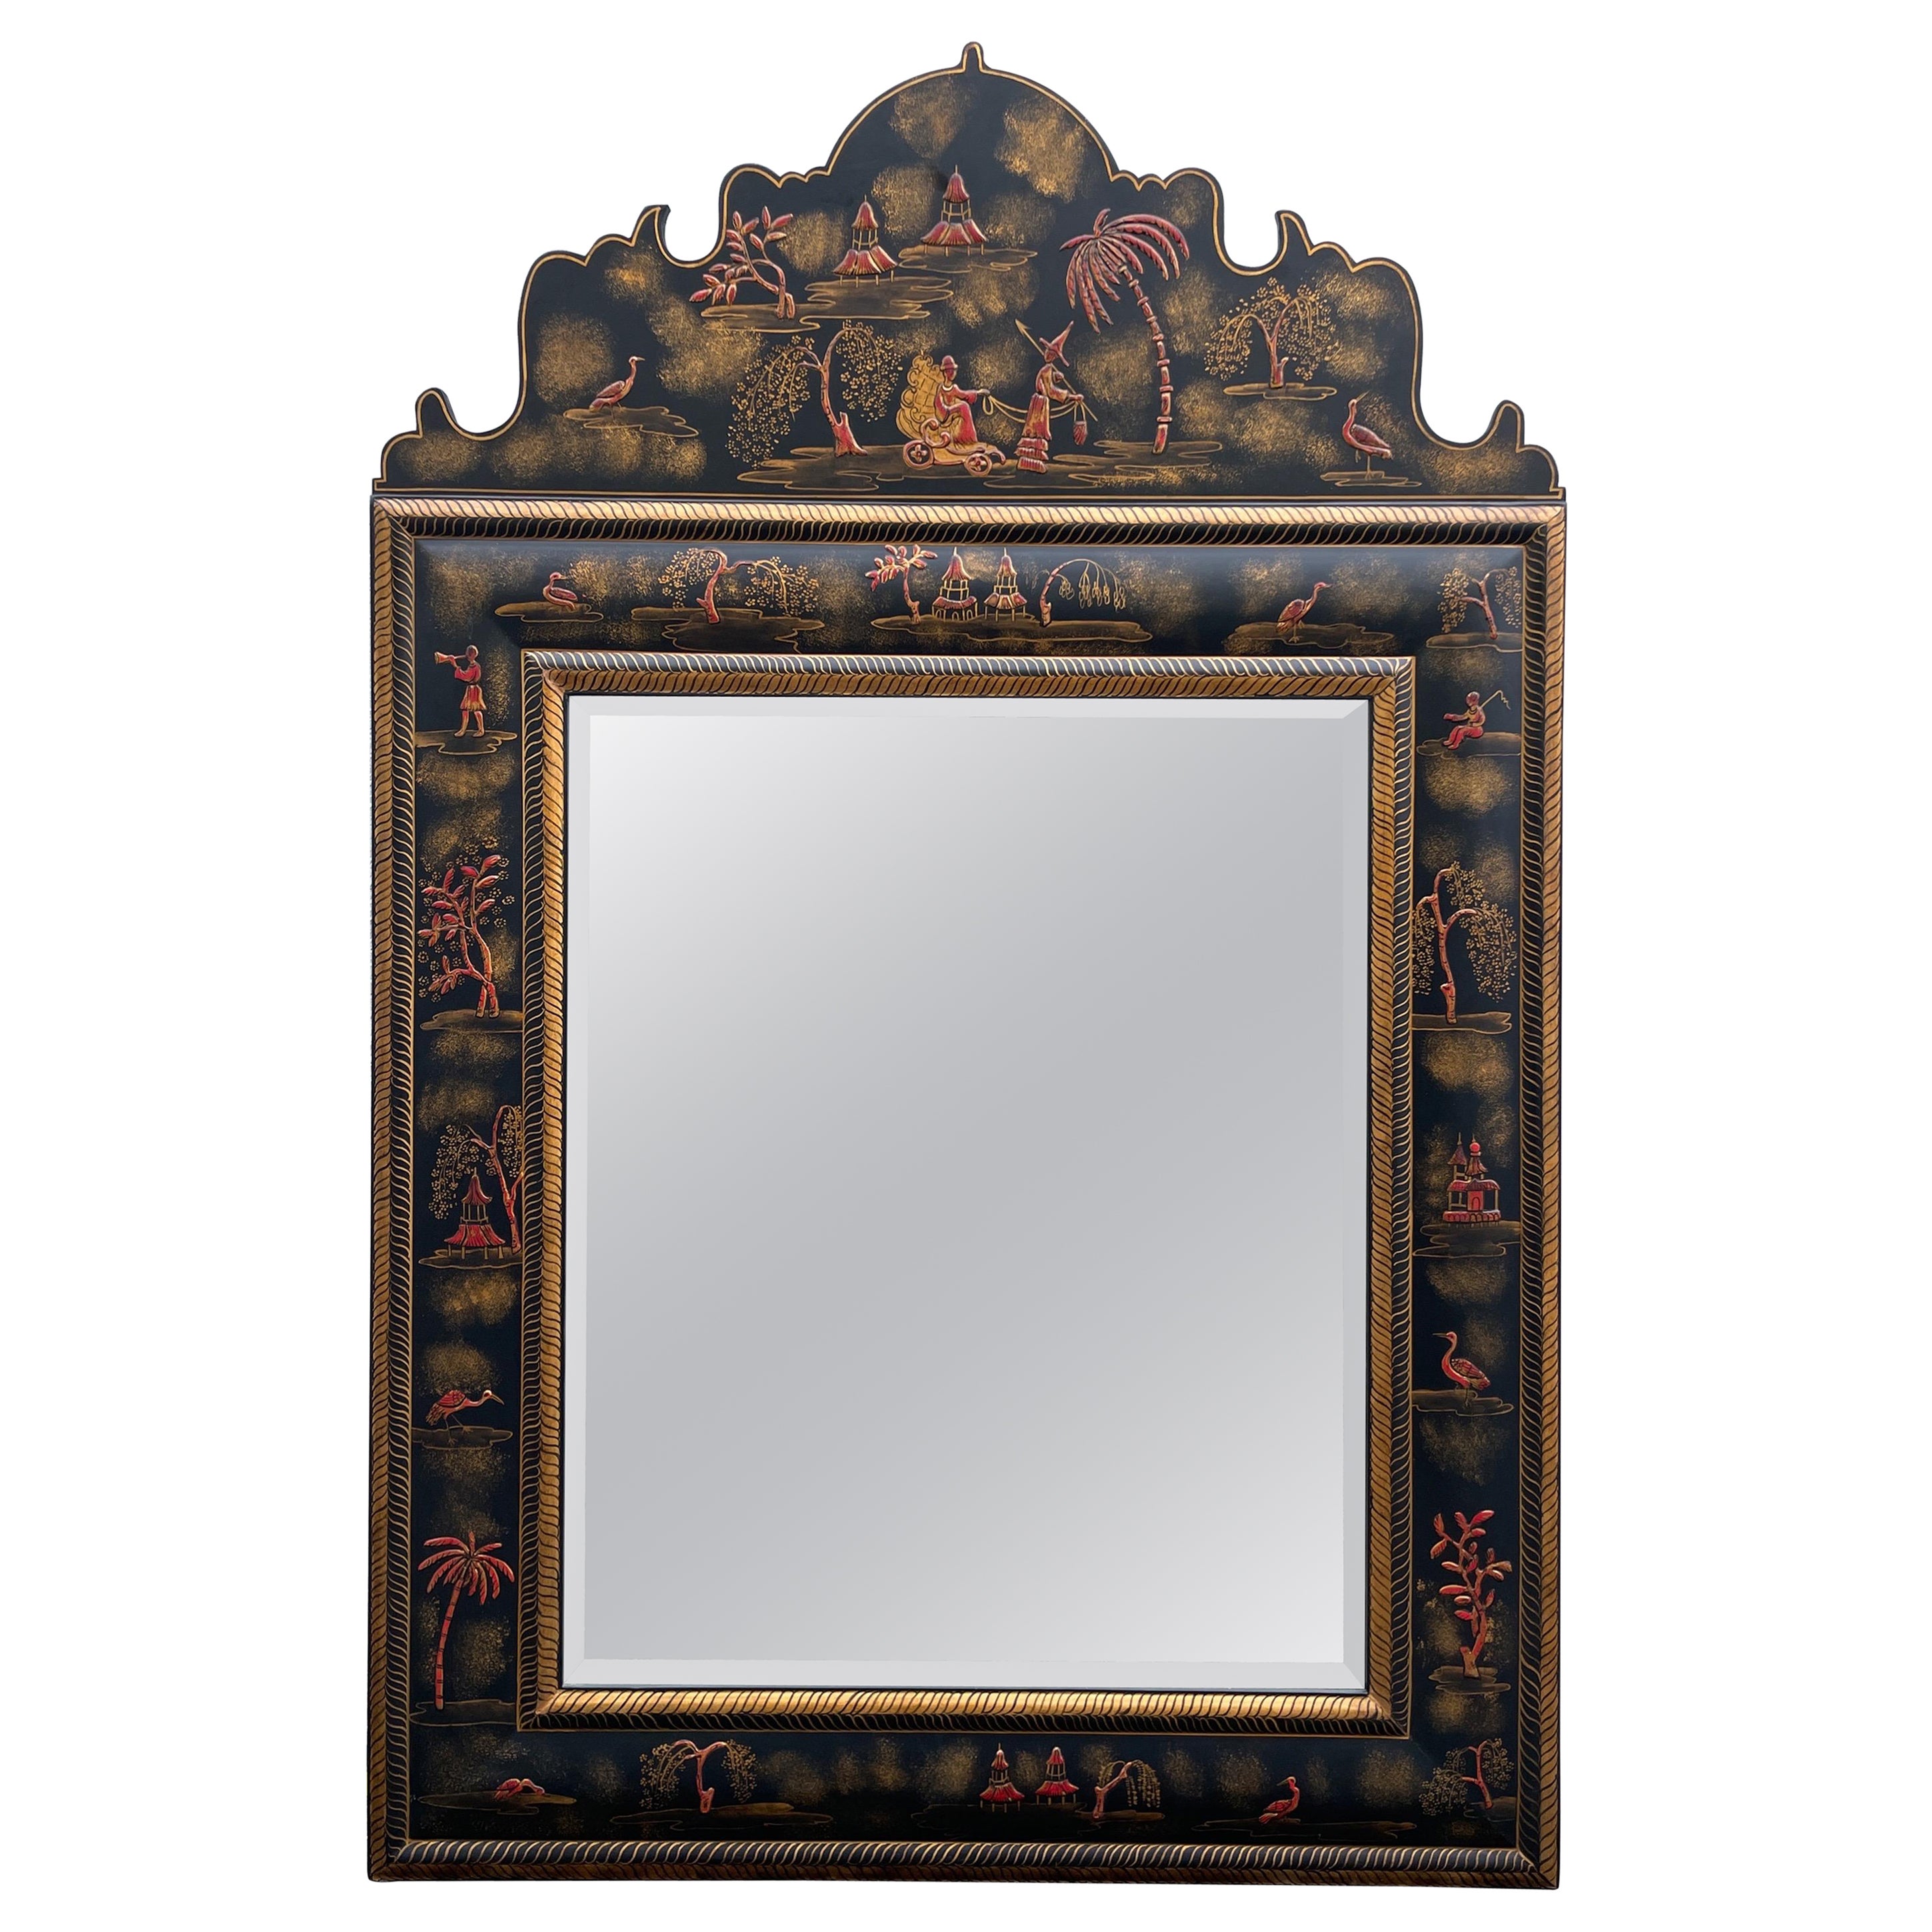 Large Pagoda Style Chinoiserie Mirror